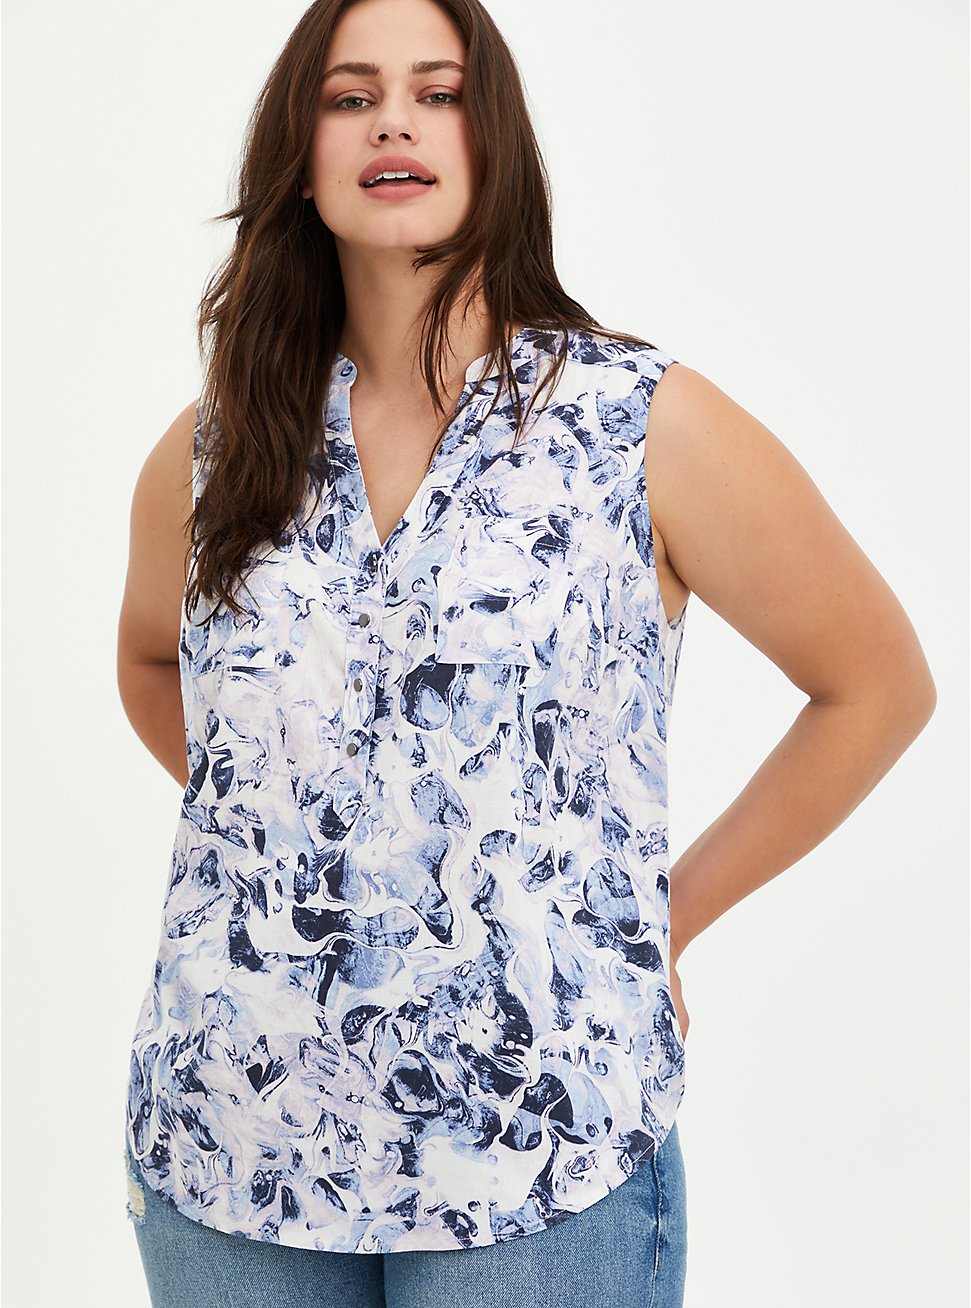 Harper - Blue Marble Textured Stretch Rayon Tank, MARBLE - WHITE, hi-res